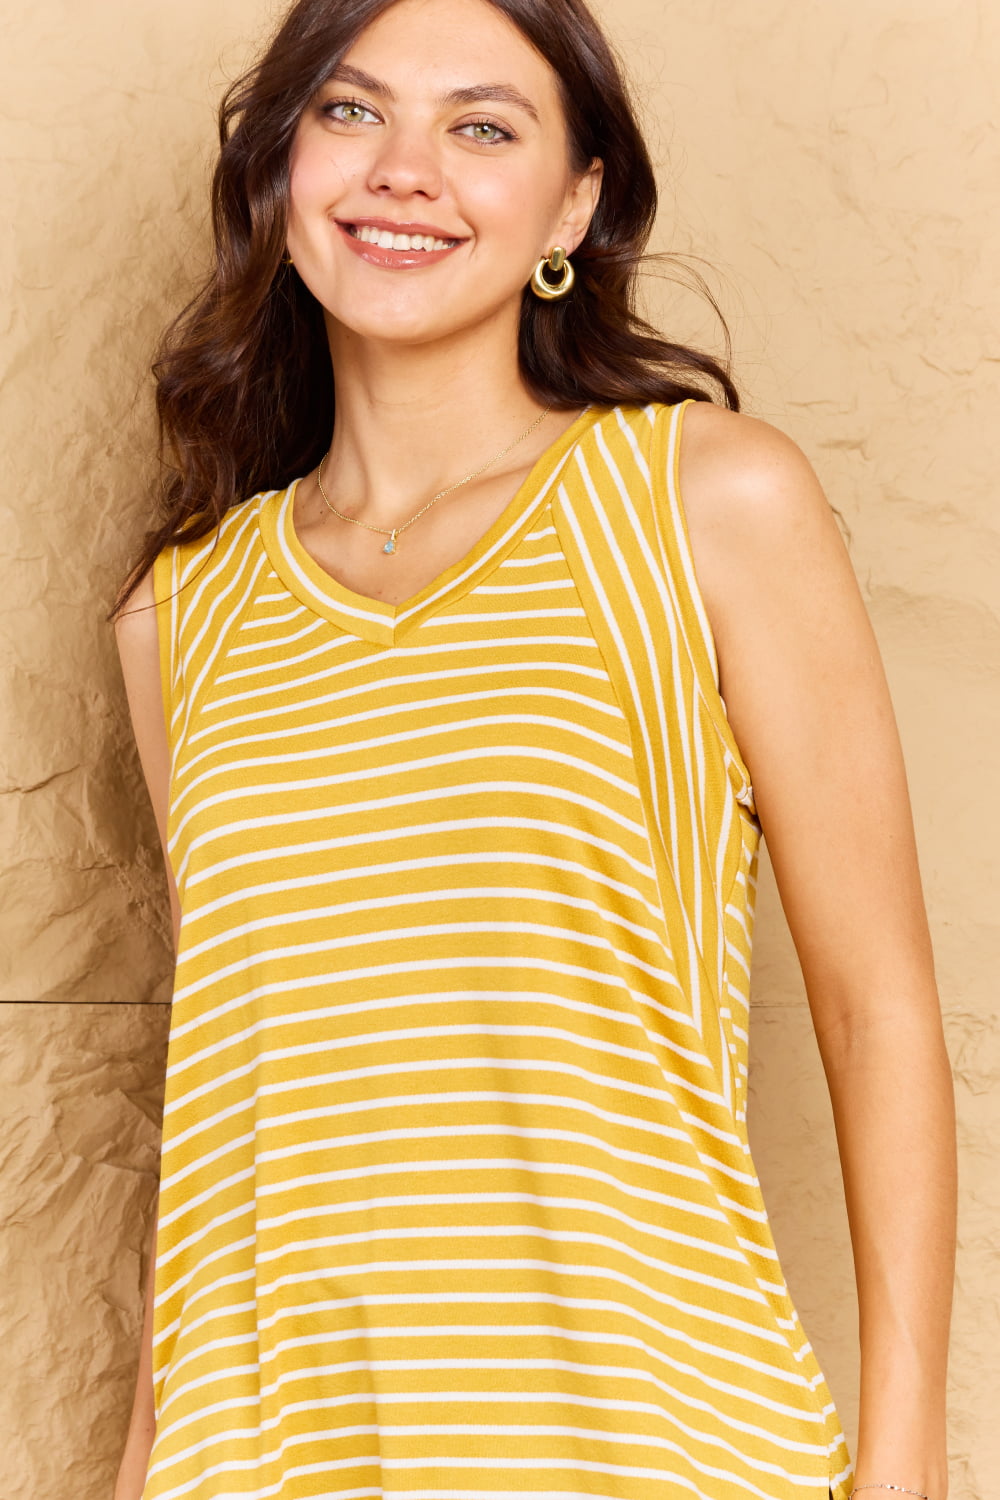 Doorbuster! Talk To Me Striped Sleeveless V-Neck Top